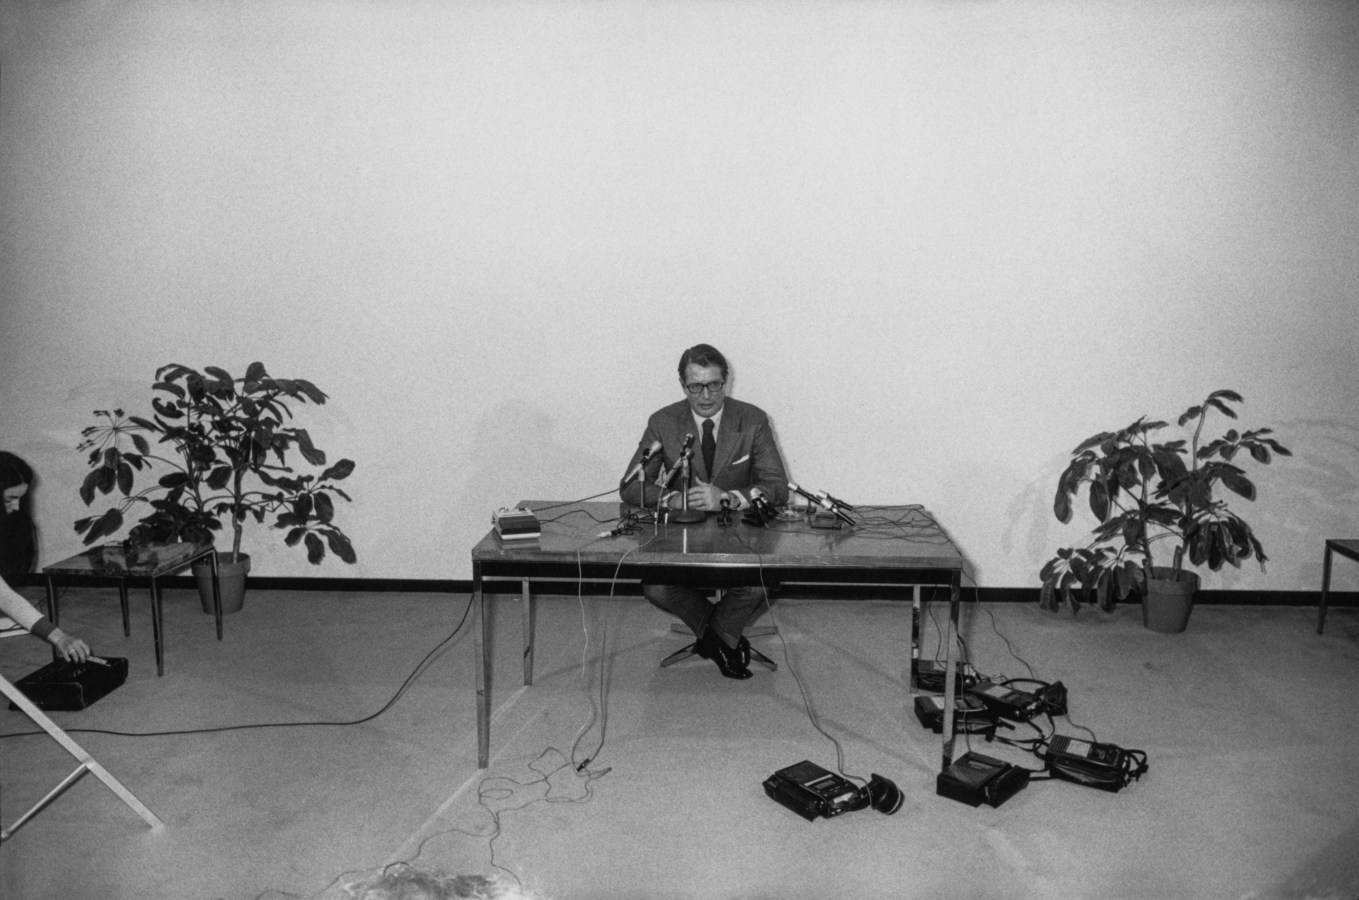 Black-and-white photograph of a man behind multiple microphones at a table against a blank wall